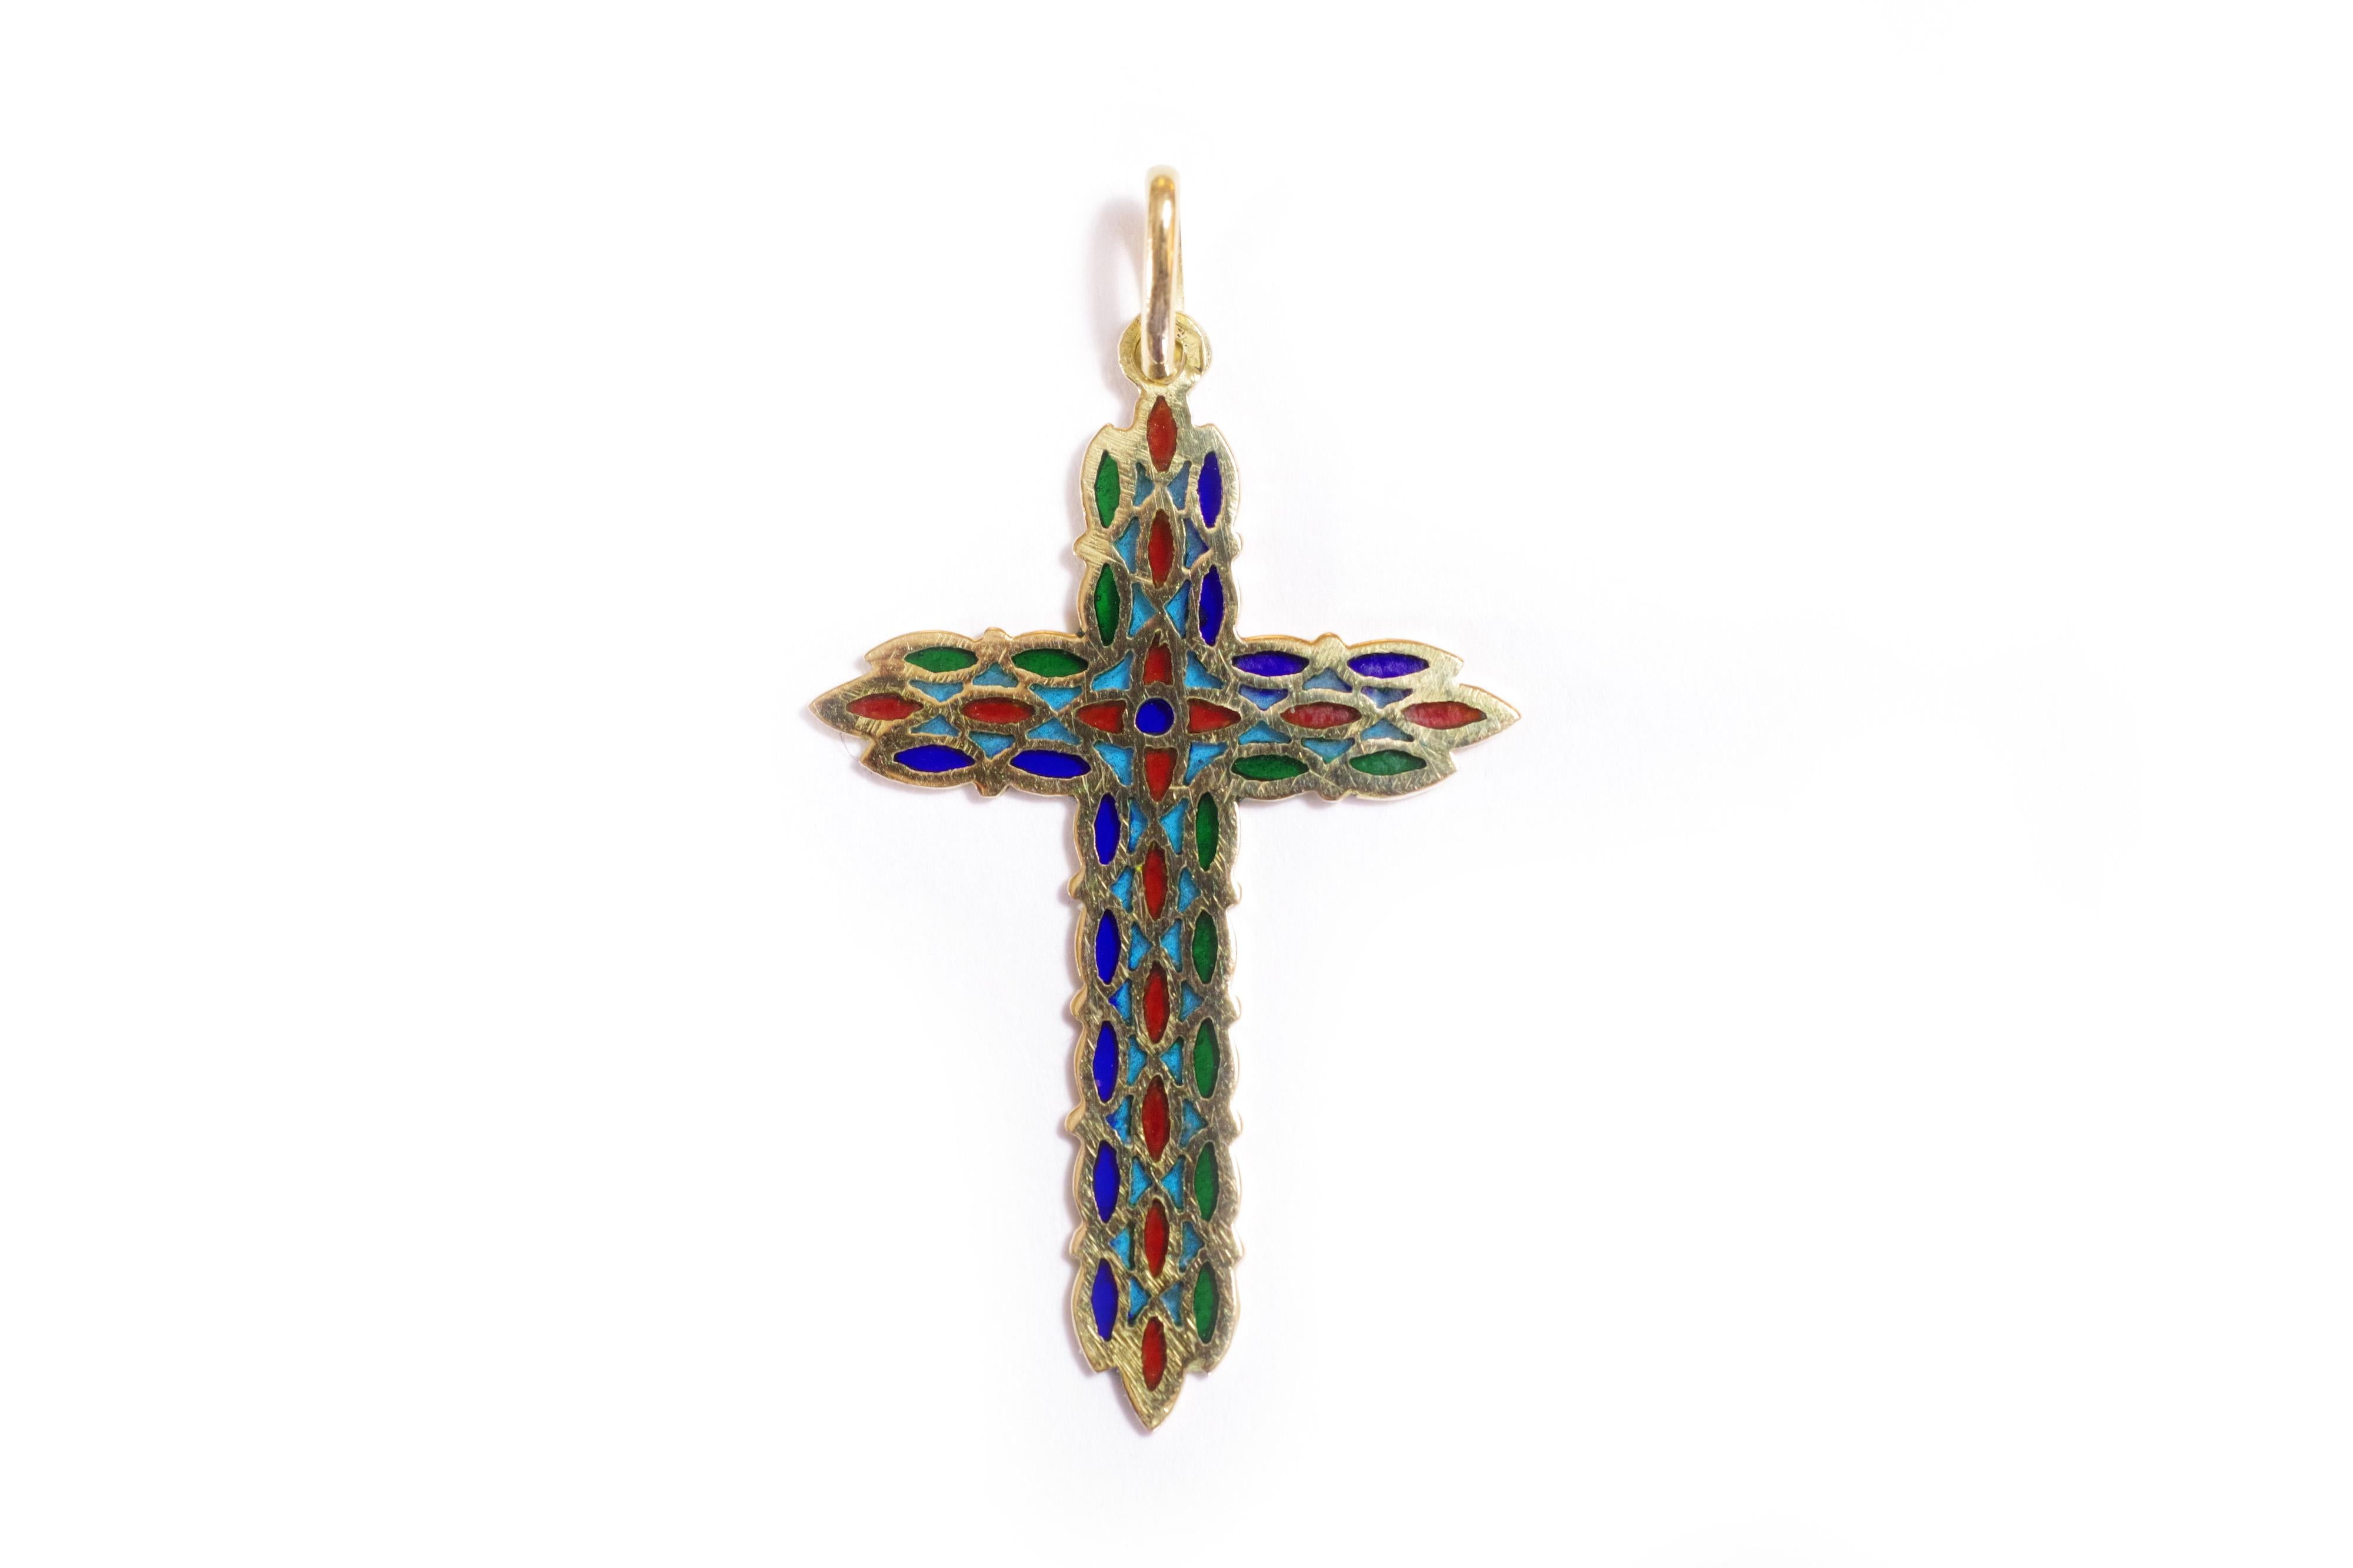 Plique a jour enamel cross pendant in 18 karat yellow gold. This religious pendant is elegantly decorated with translucent enamels of blue, green and red, reminiscent of church windows. Enamel is a technique consisting of melting minerals reduced to